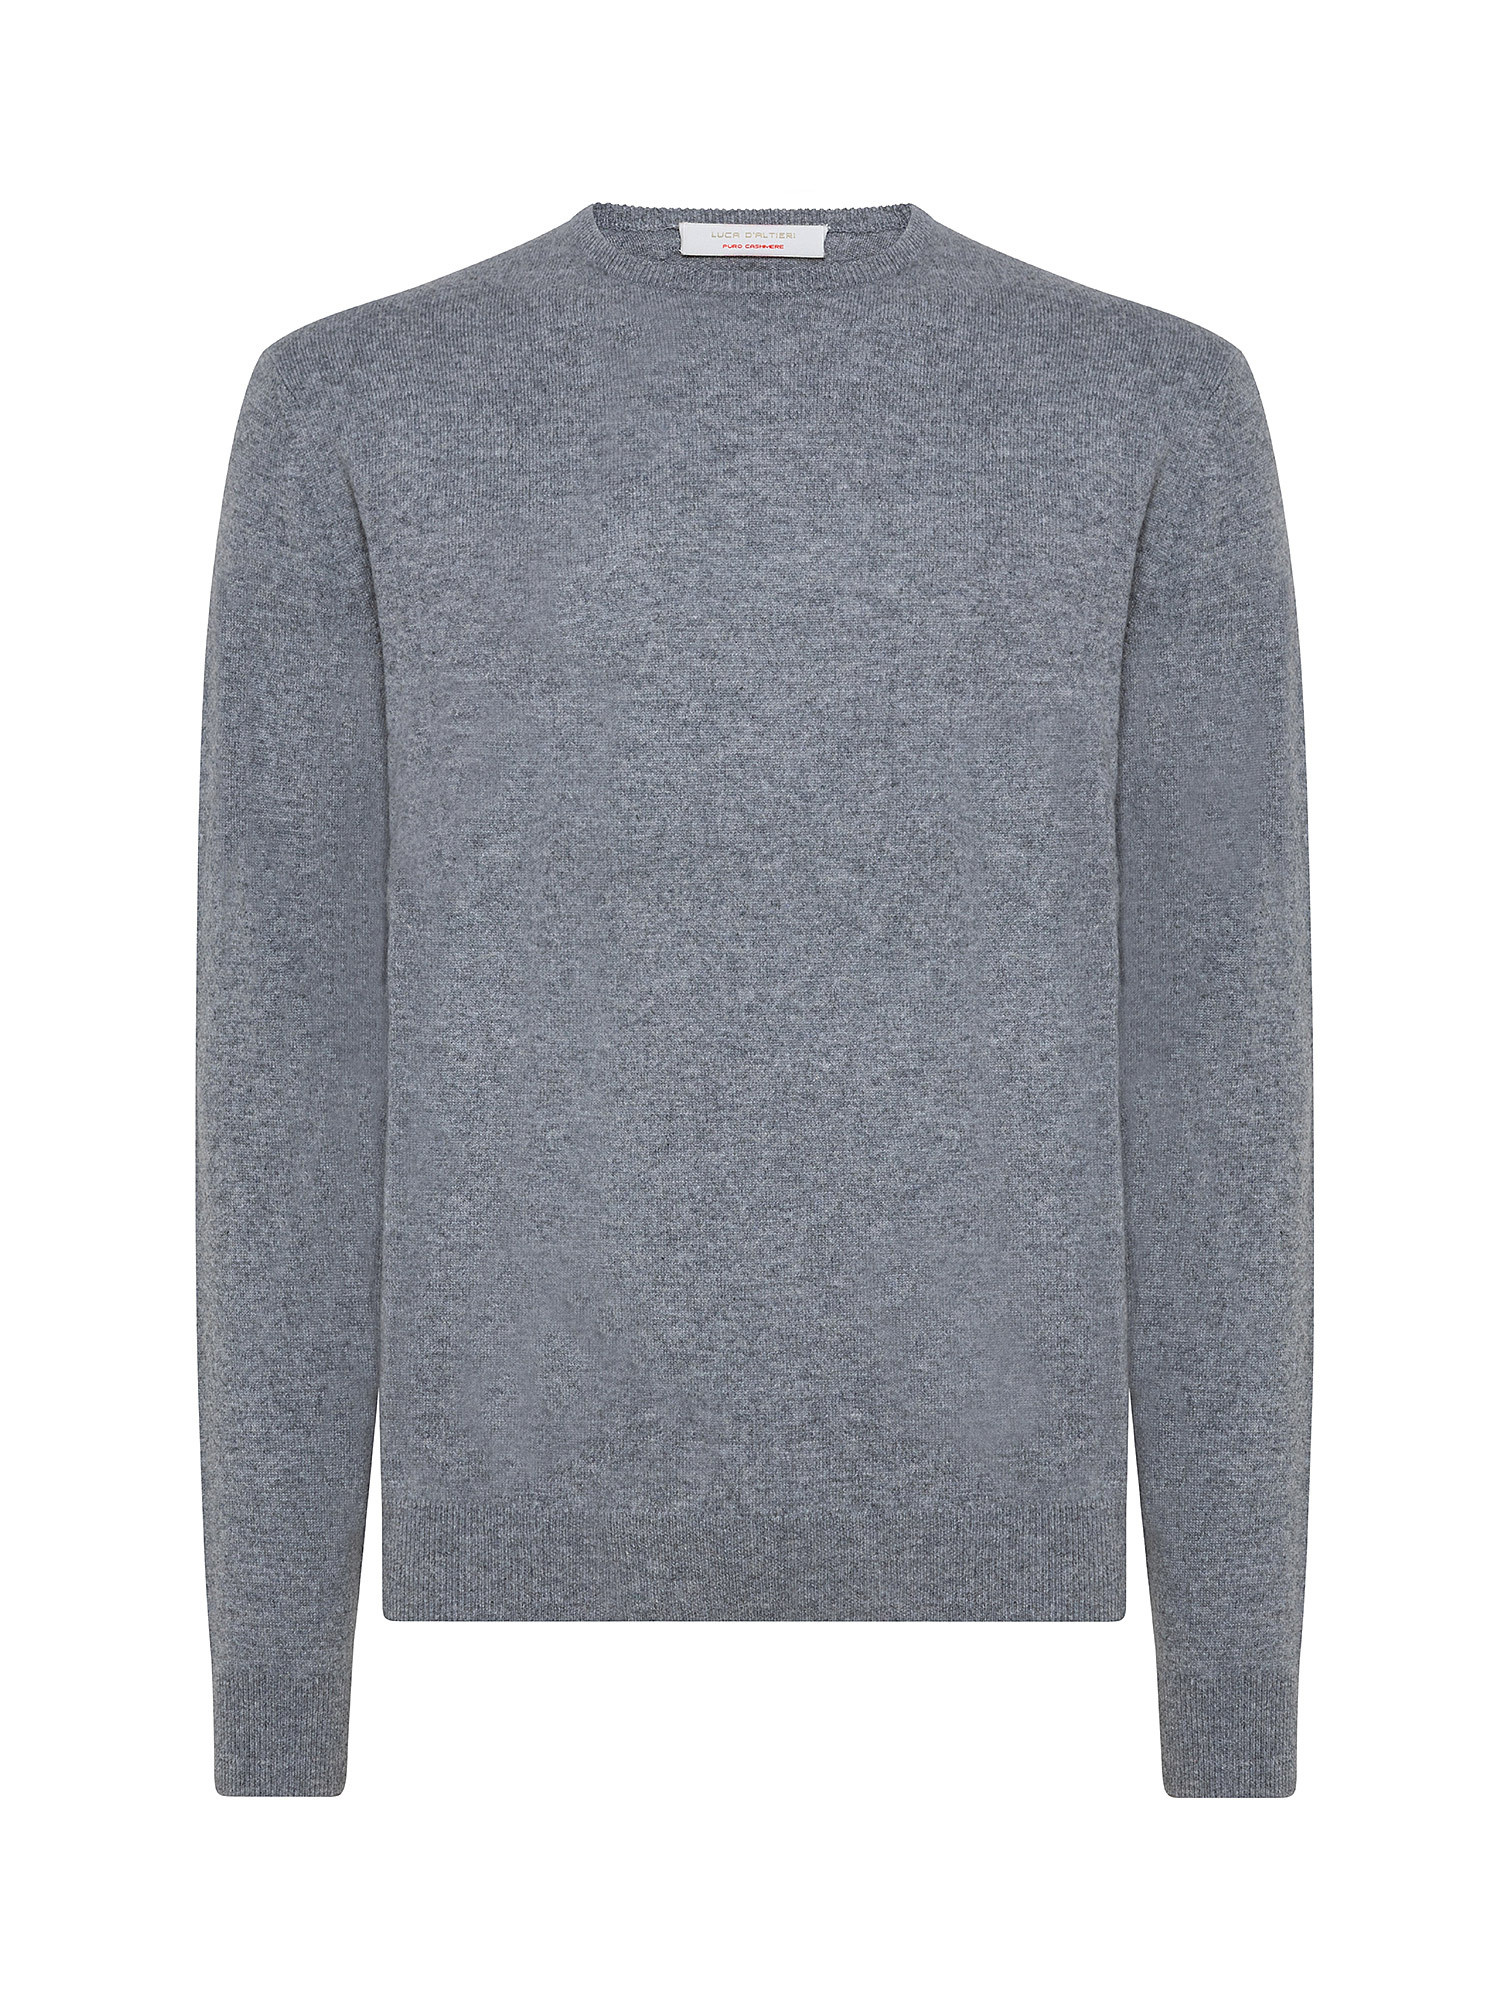 Pure cashmere pullover, Grey, large image number 0